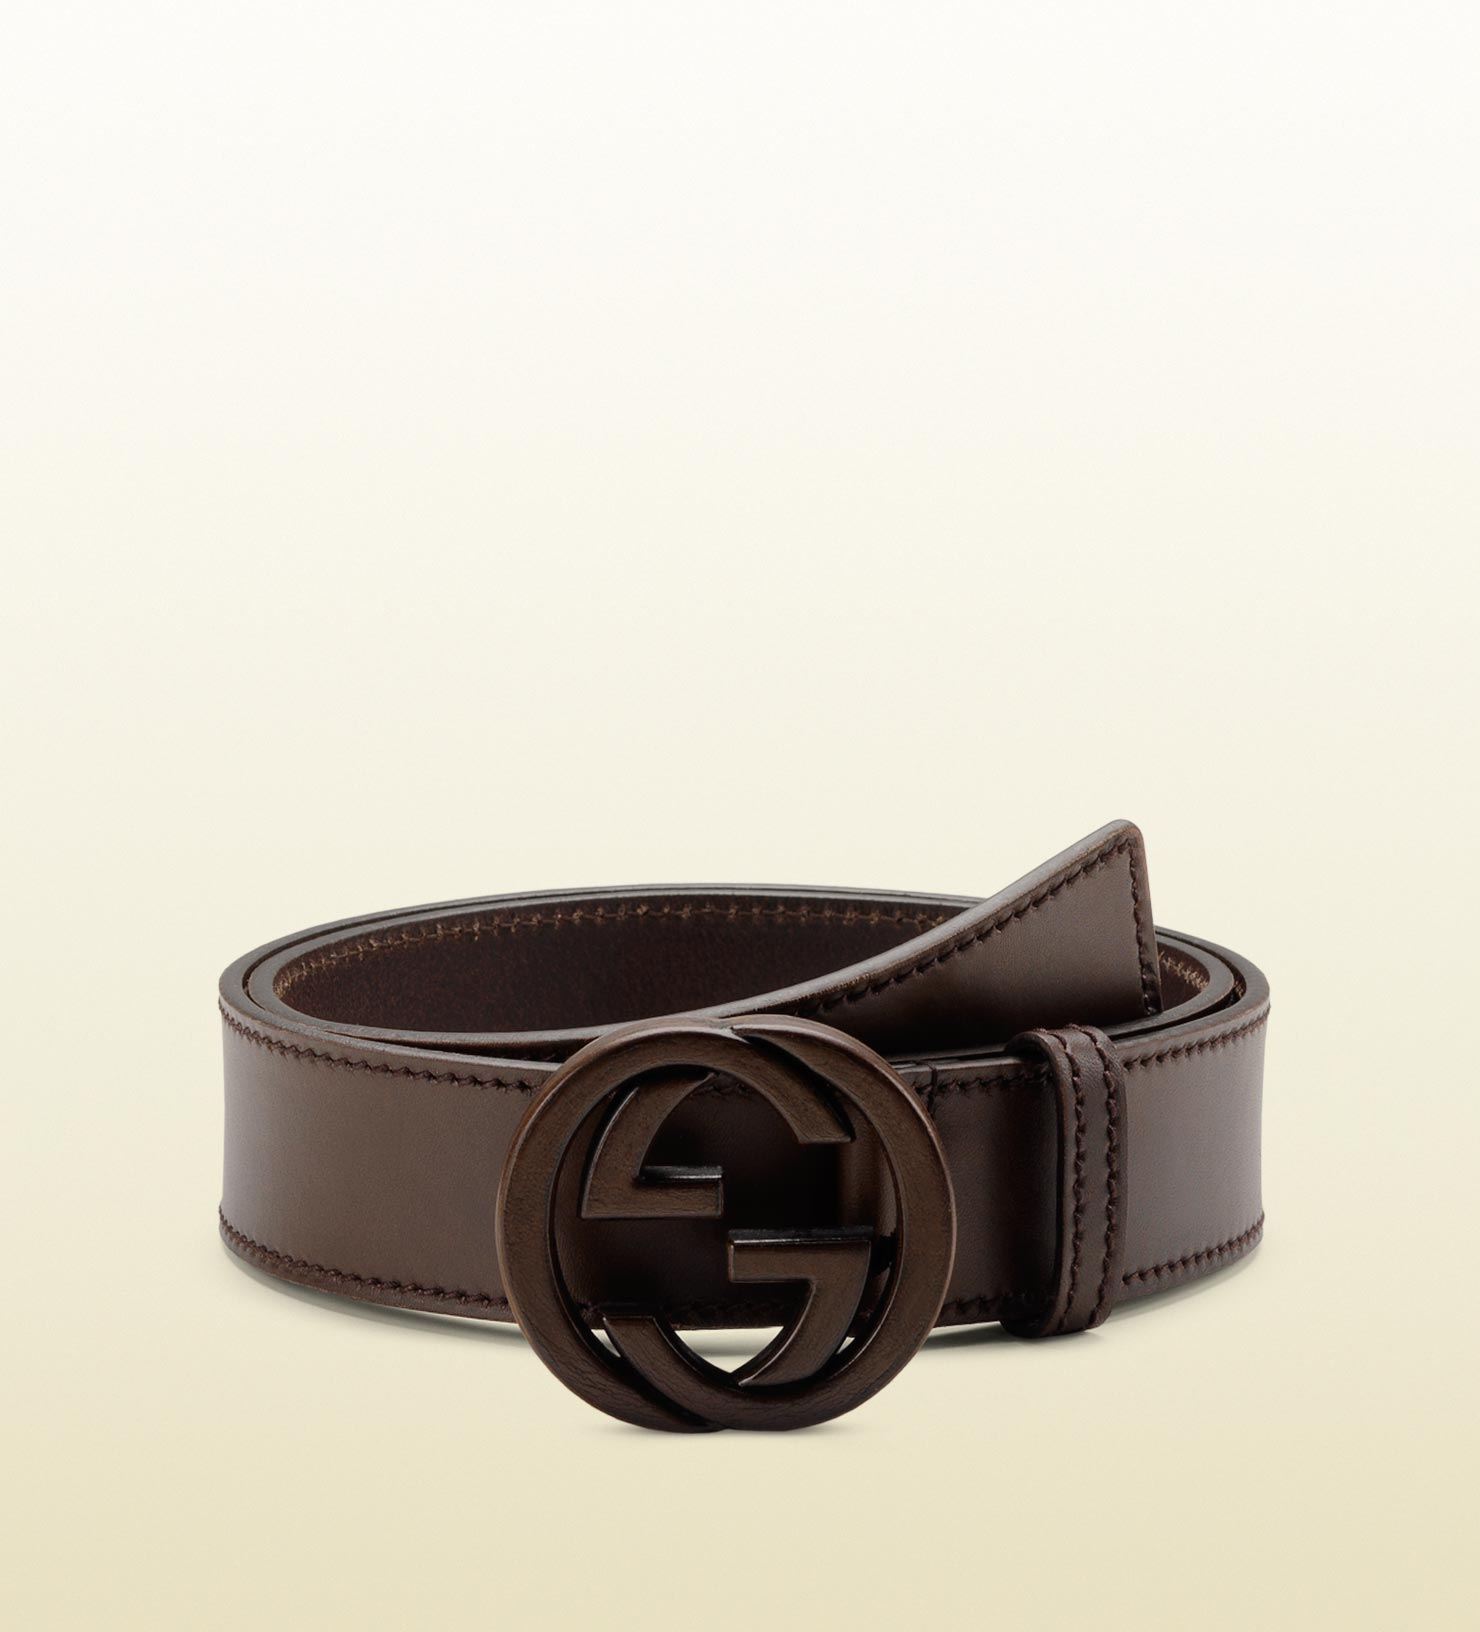 Lyst - Gucci Belt with Leather Interlocking G Buckle in Brown for Men